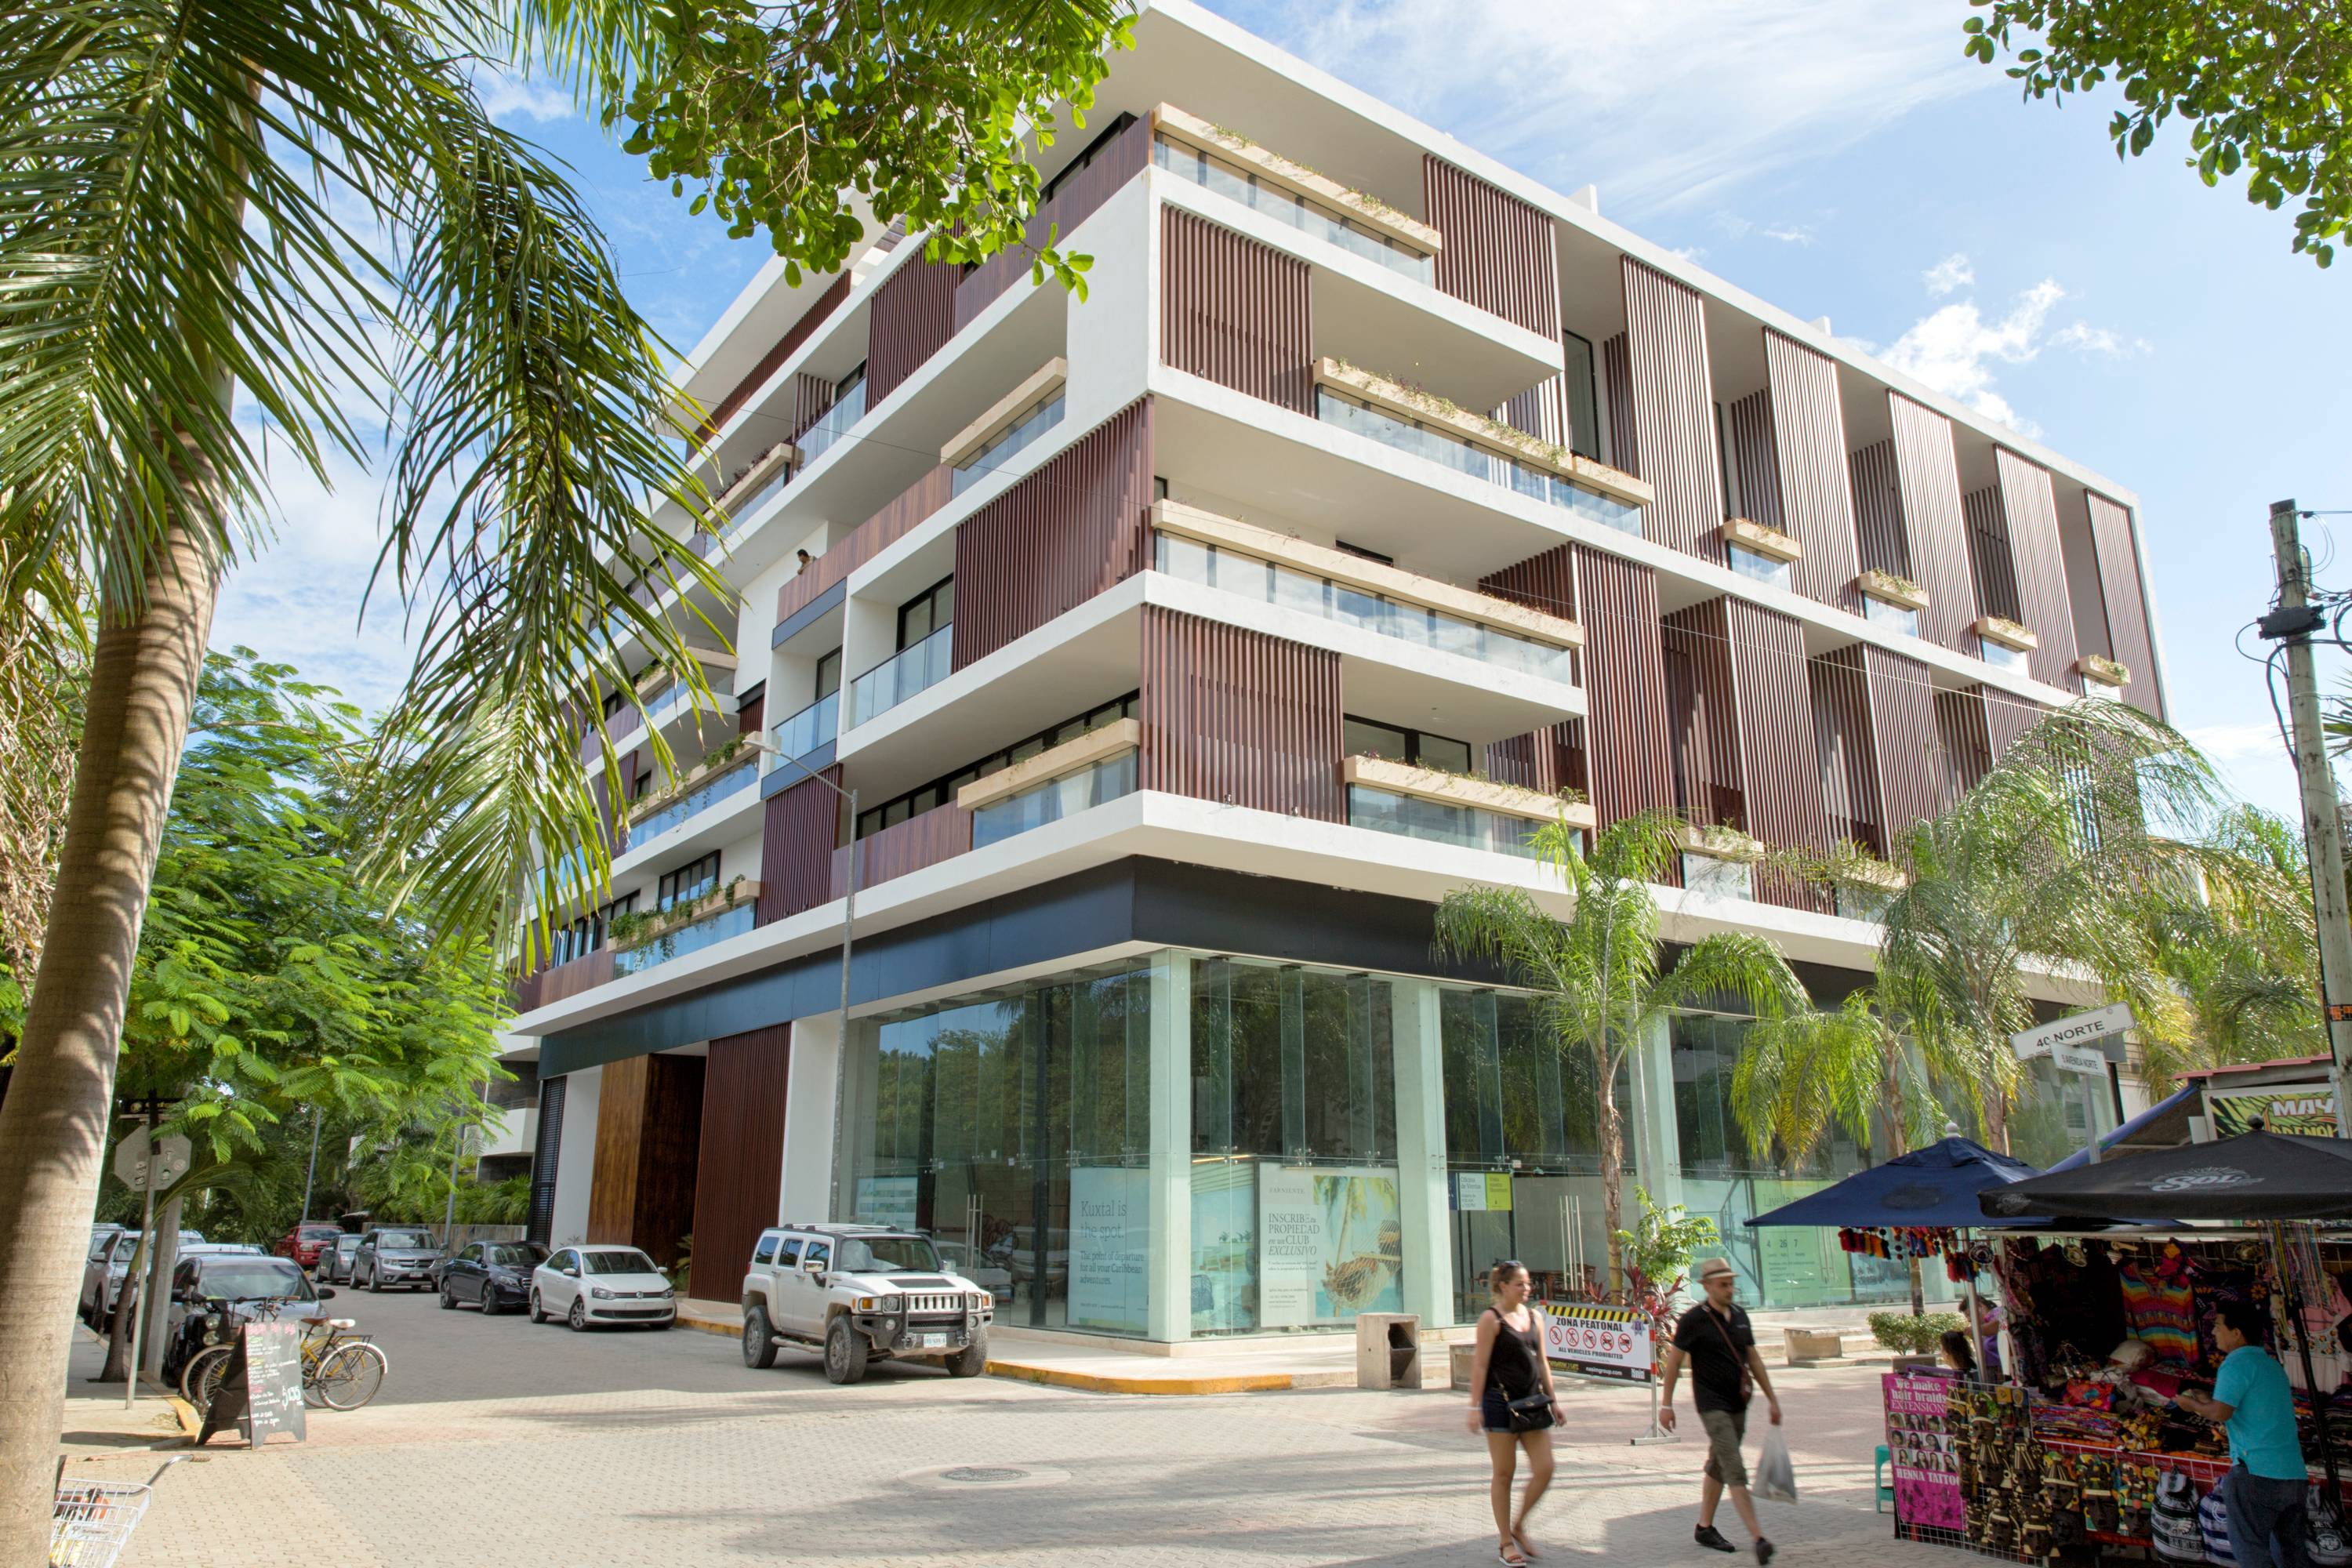 AWESOME 1 BR APARTMENT RIGHT ON THE FAMOUS FIFTH AV IN PLAYA DEL CARMEN